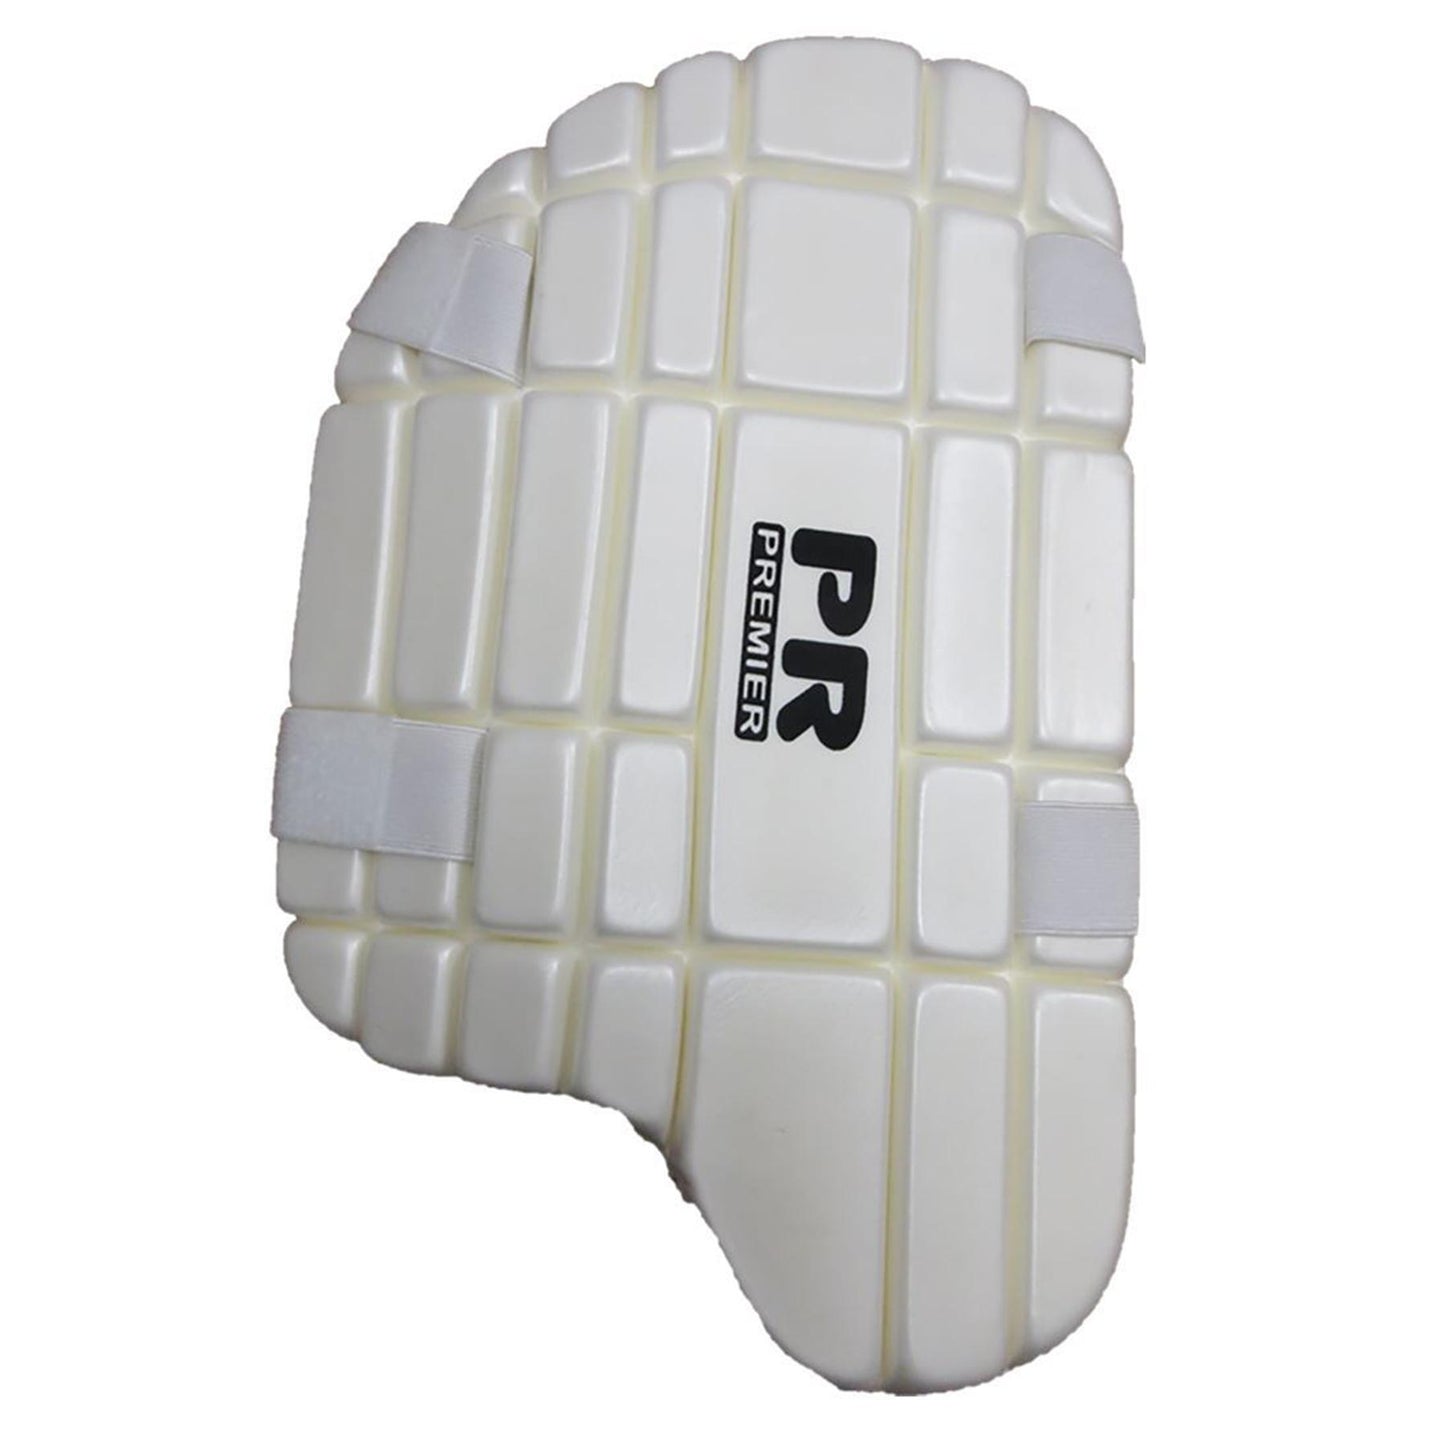 Buy PR Thigh guard Moulded Men-Thigh guard-Splay (UK) Limited-Splay UK Online